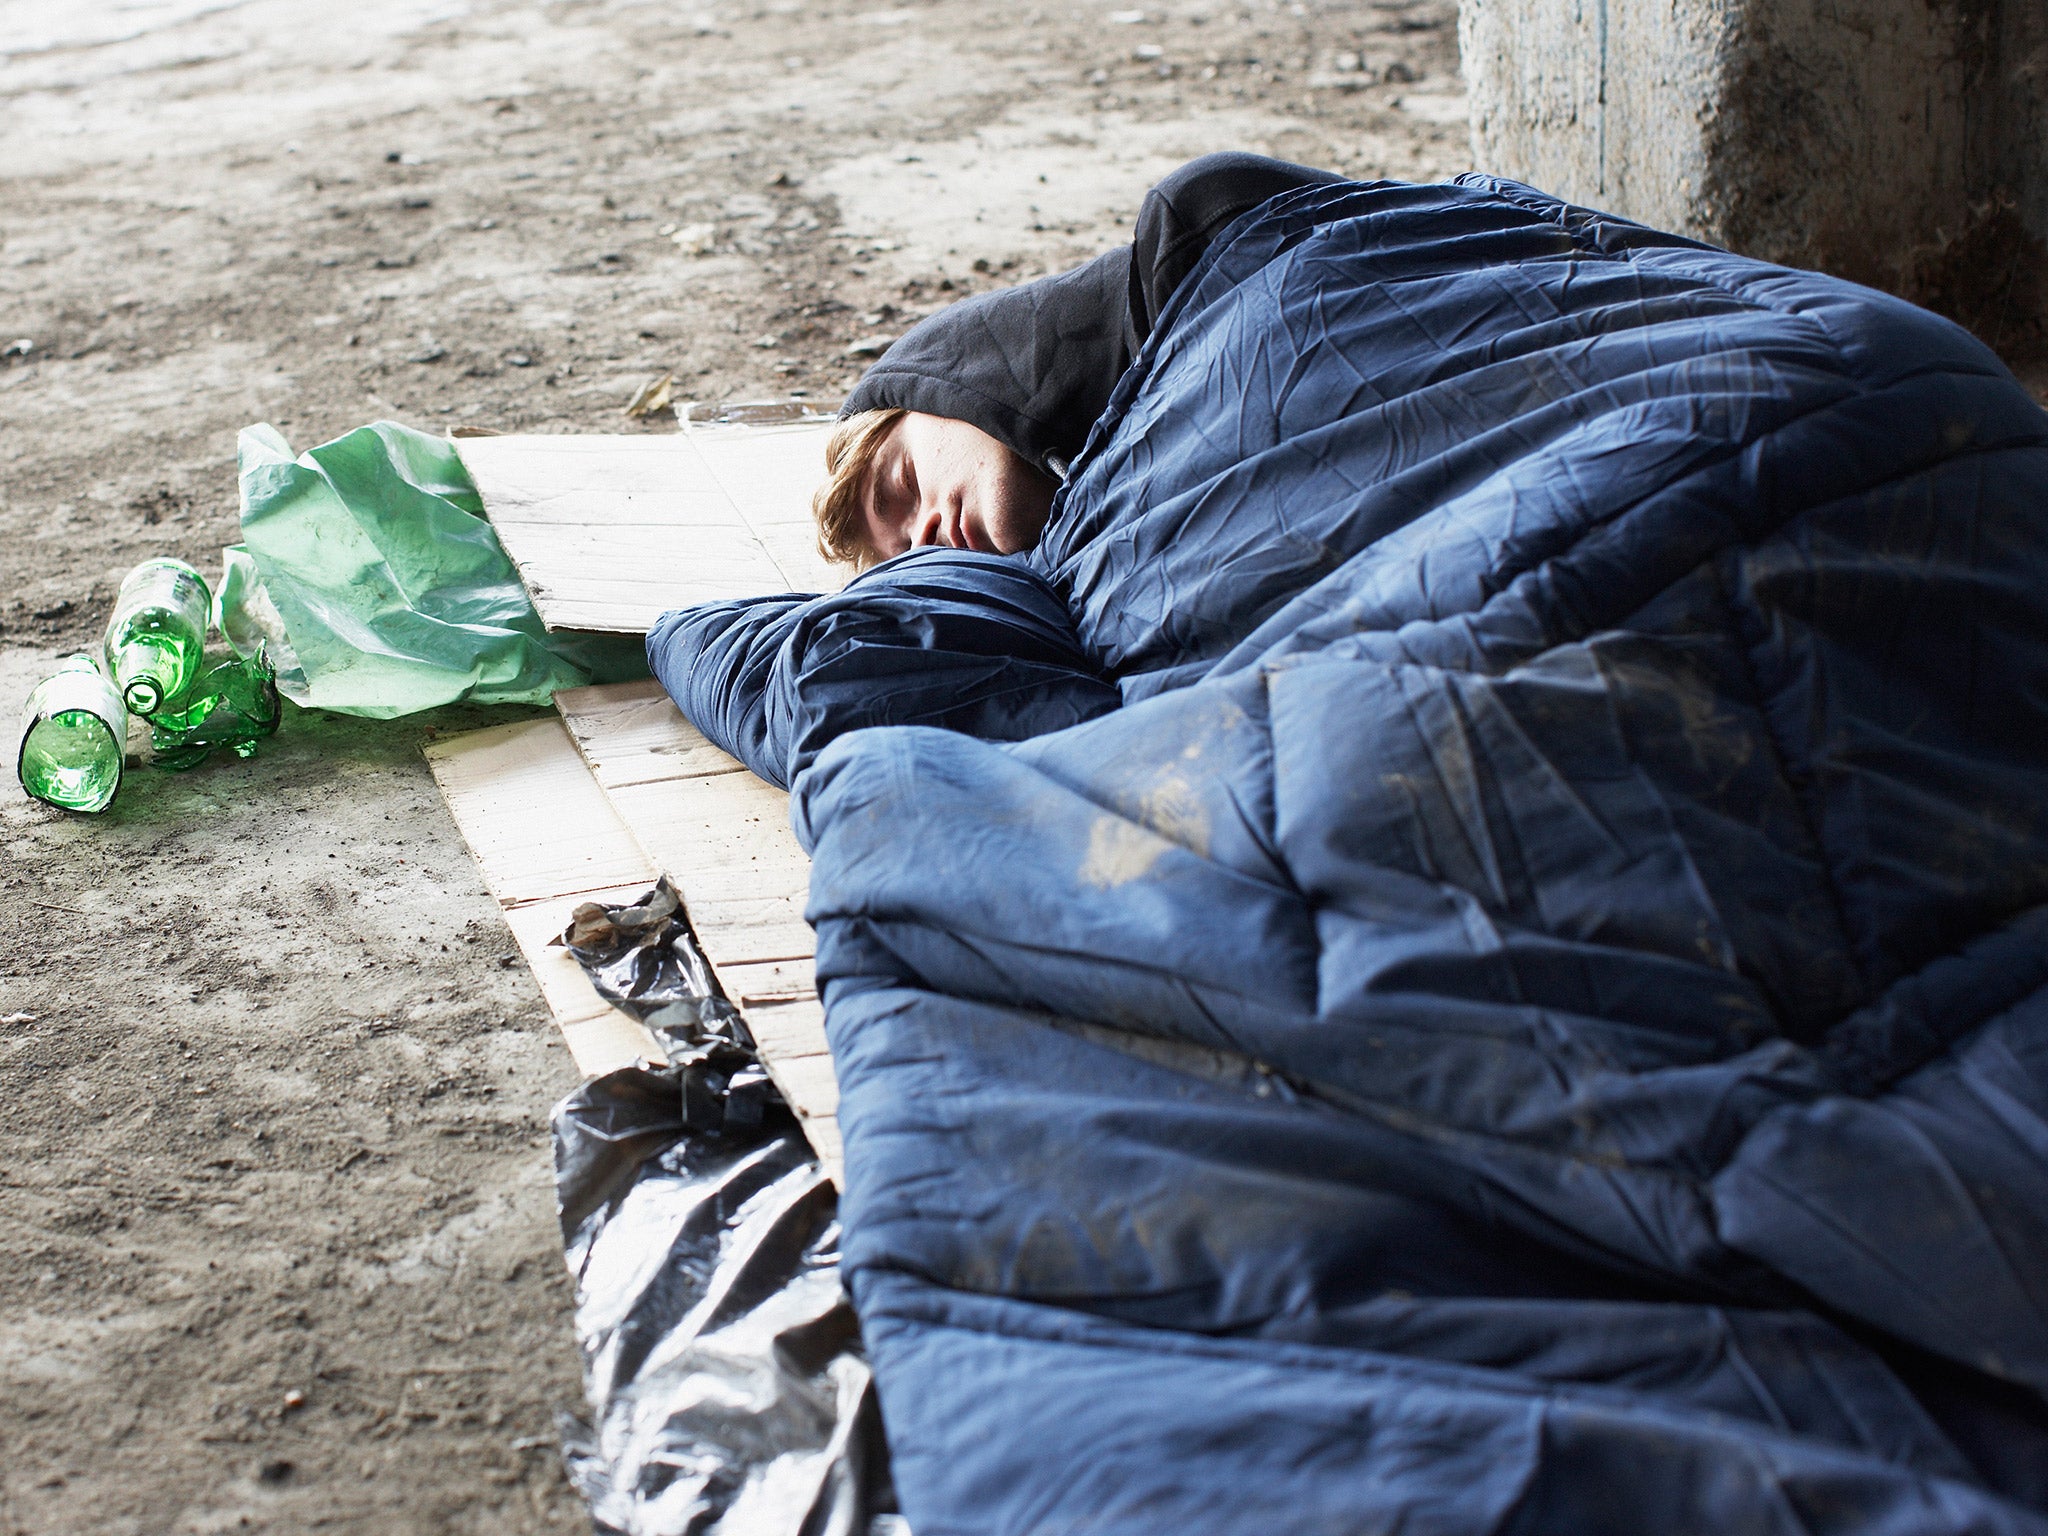 Is this what our politicians want? A young person sleeps rough